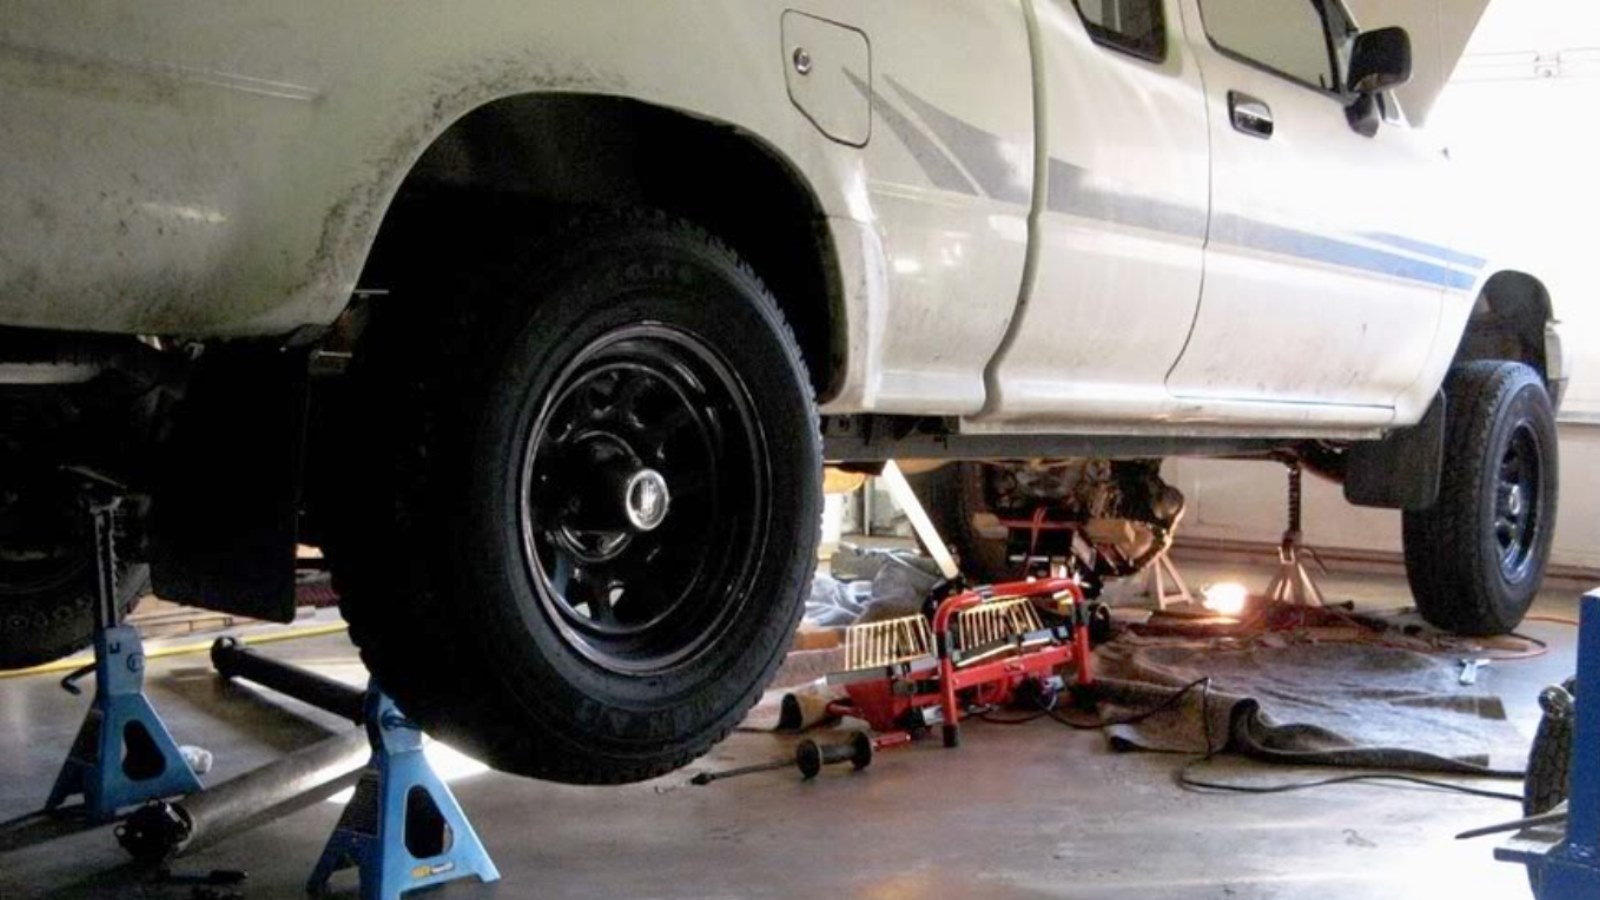 Toyota Truck properly supported by jack stands